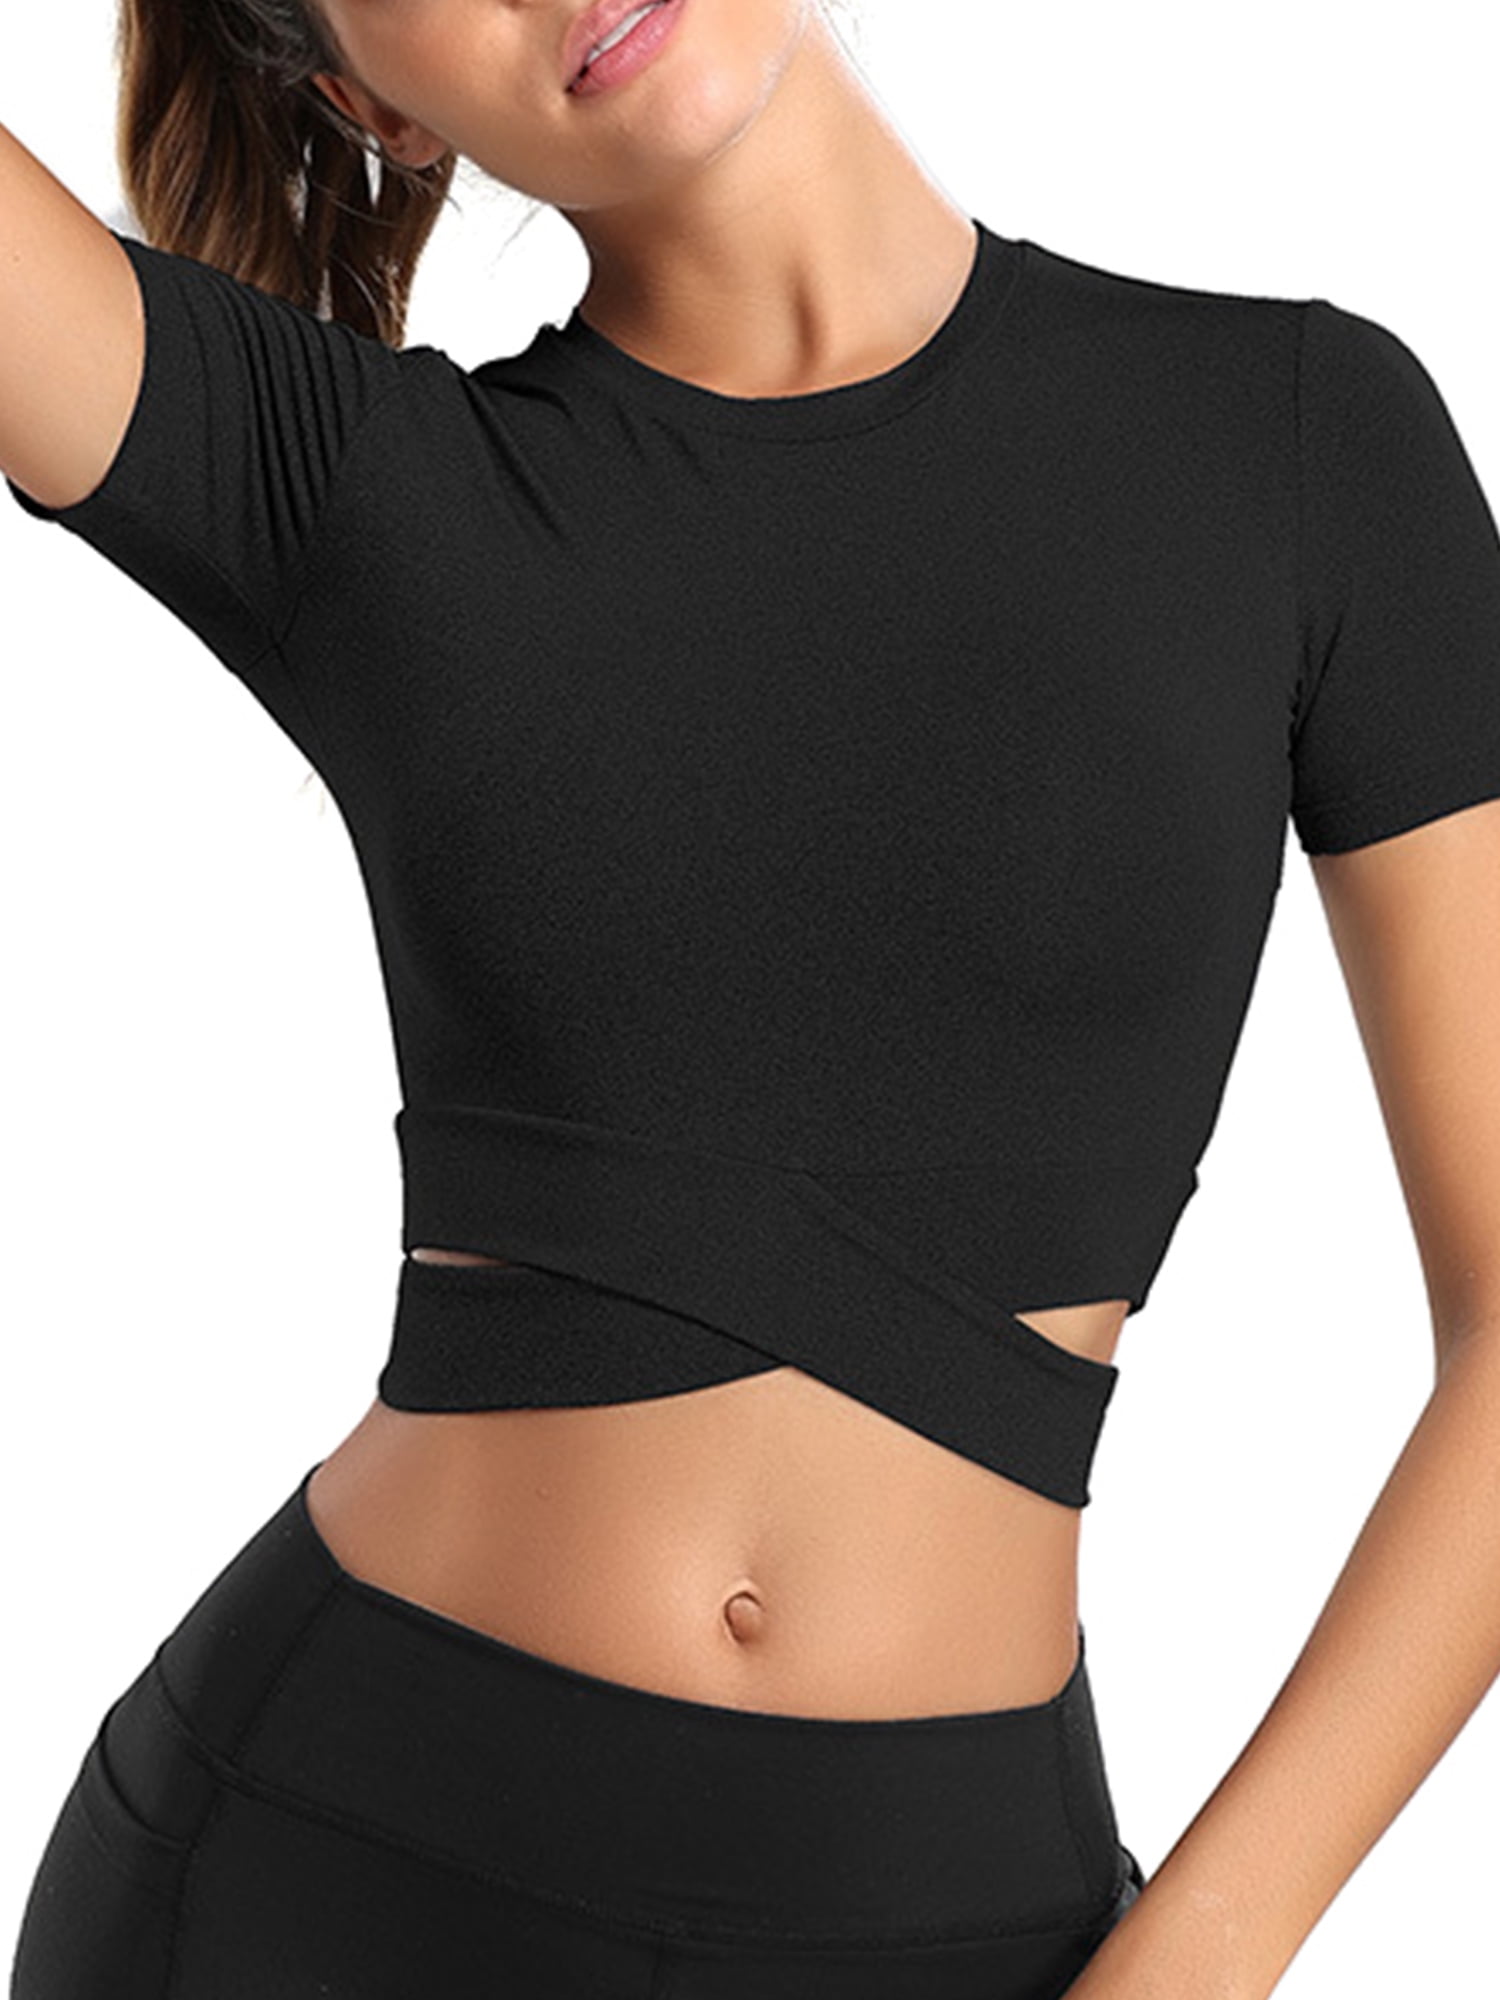 CROSS1946 Women's Gym Crop Top Shirt Sexy Workout Athletic